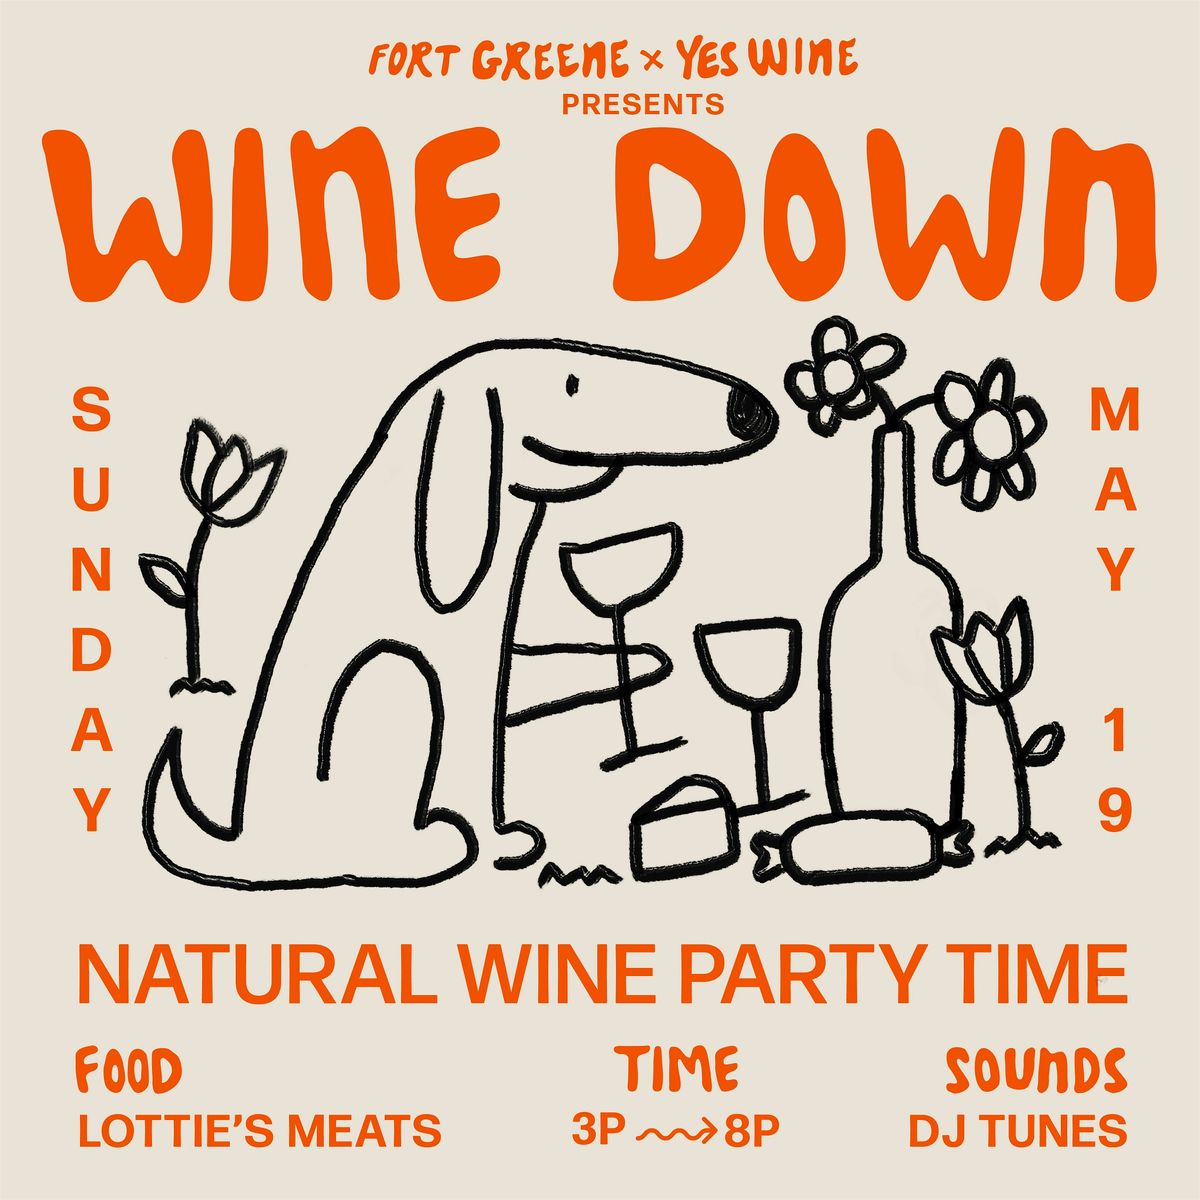 Fort Greene X Yes Wines Presents: WINE DOWN